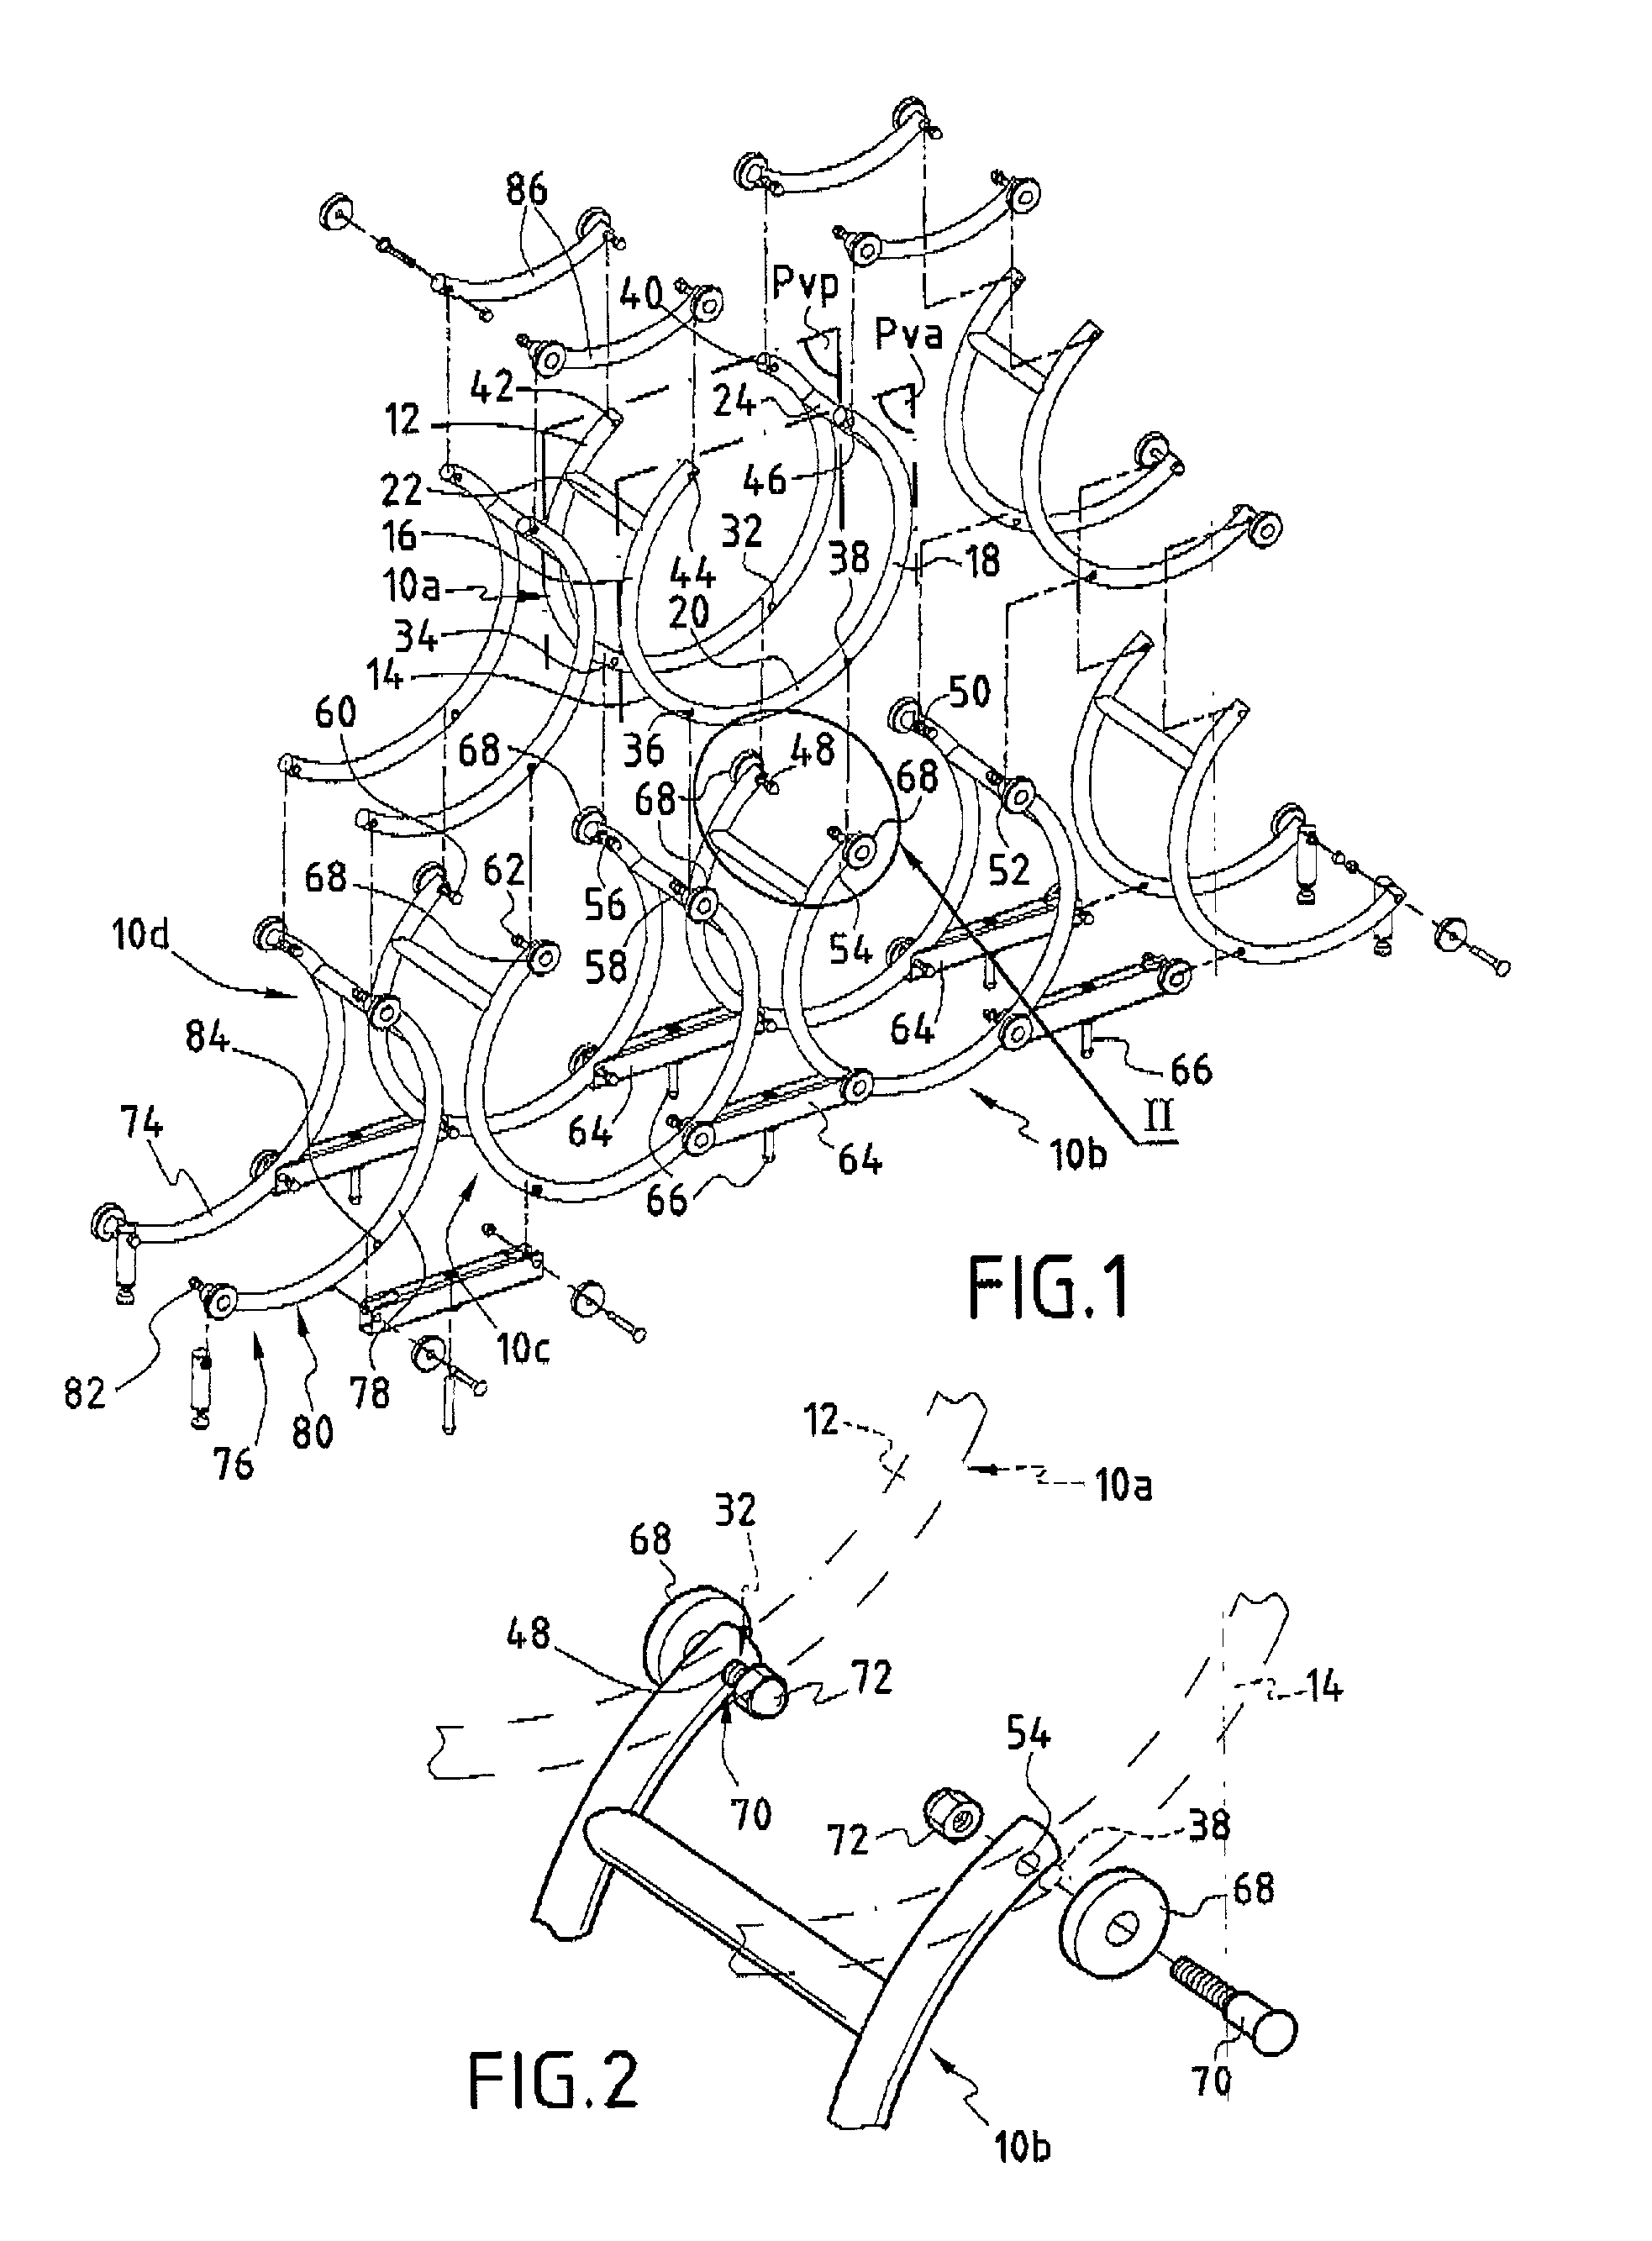 Rack for supporting circularly symmetrical containers